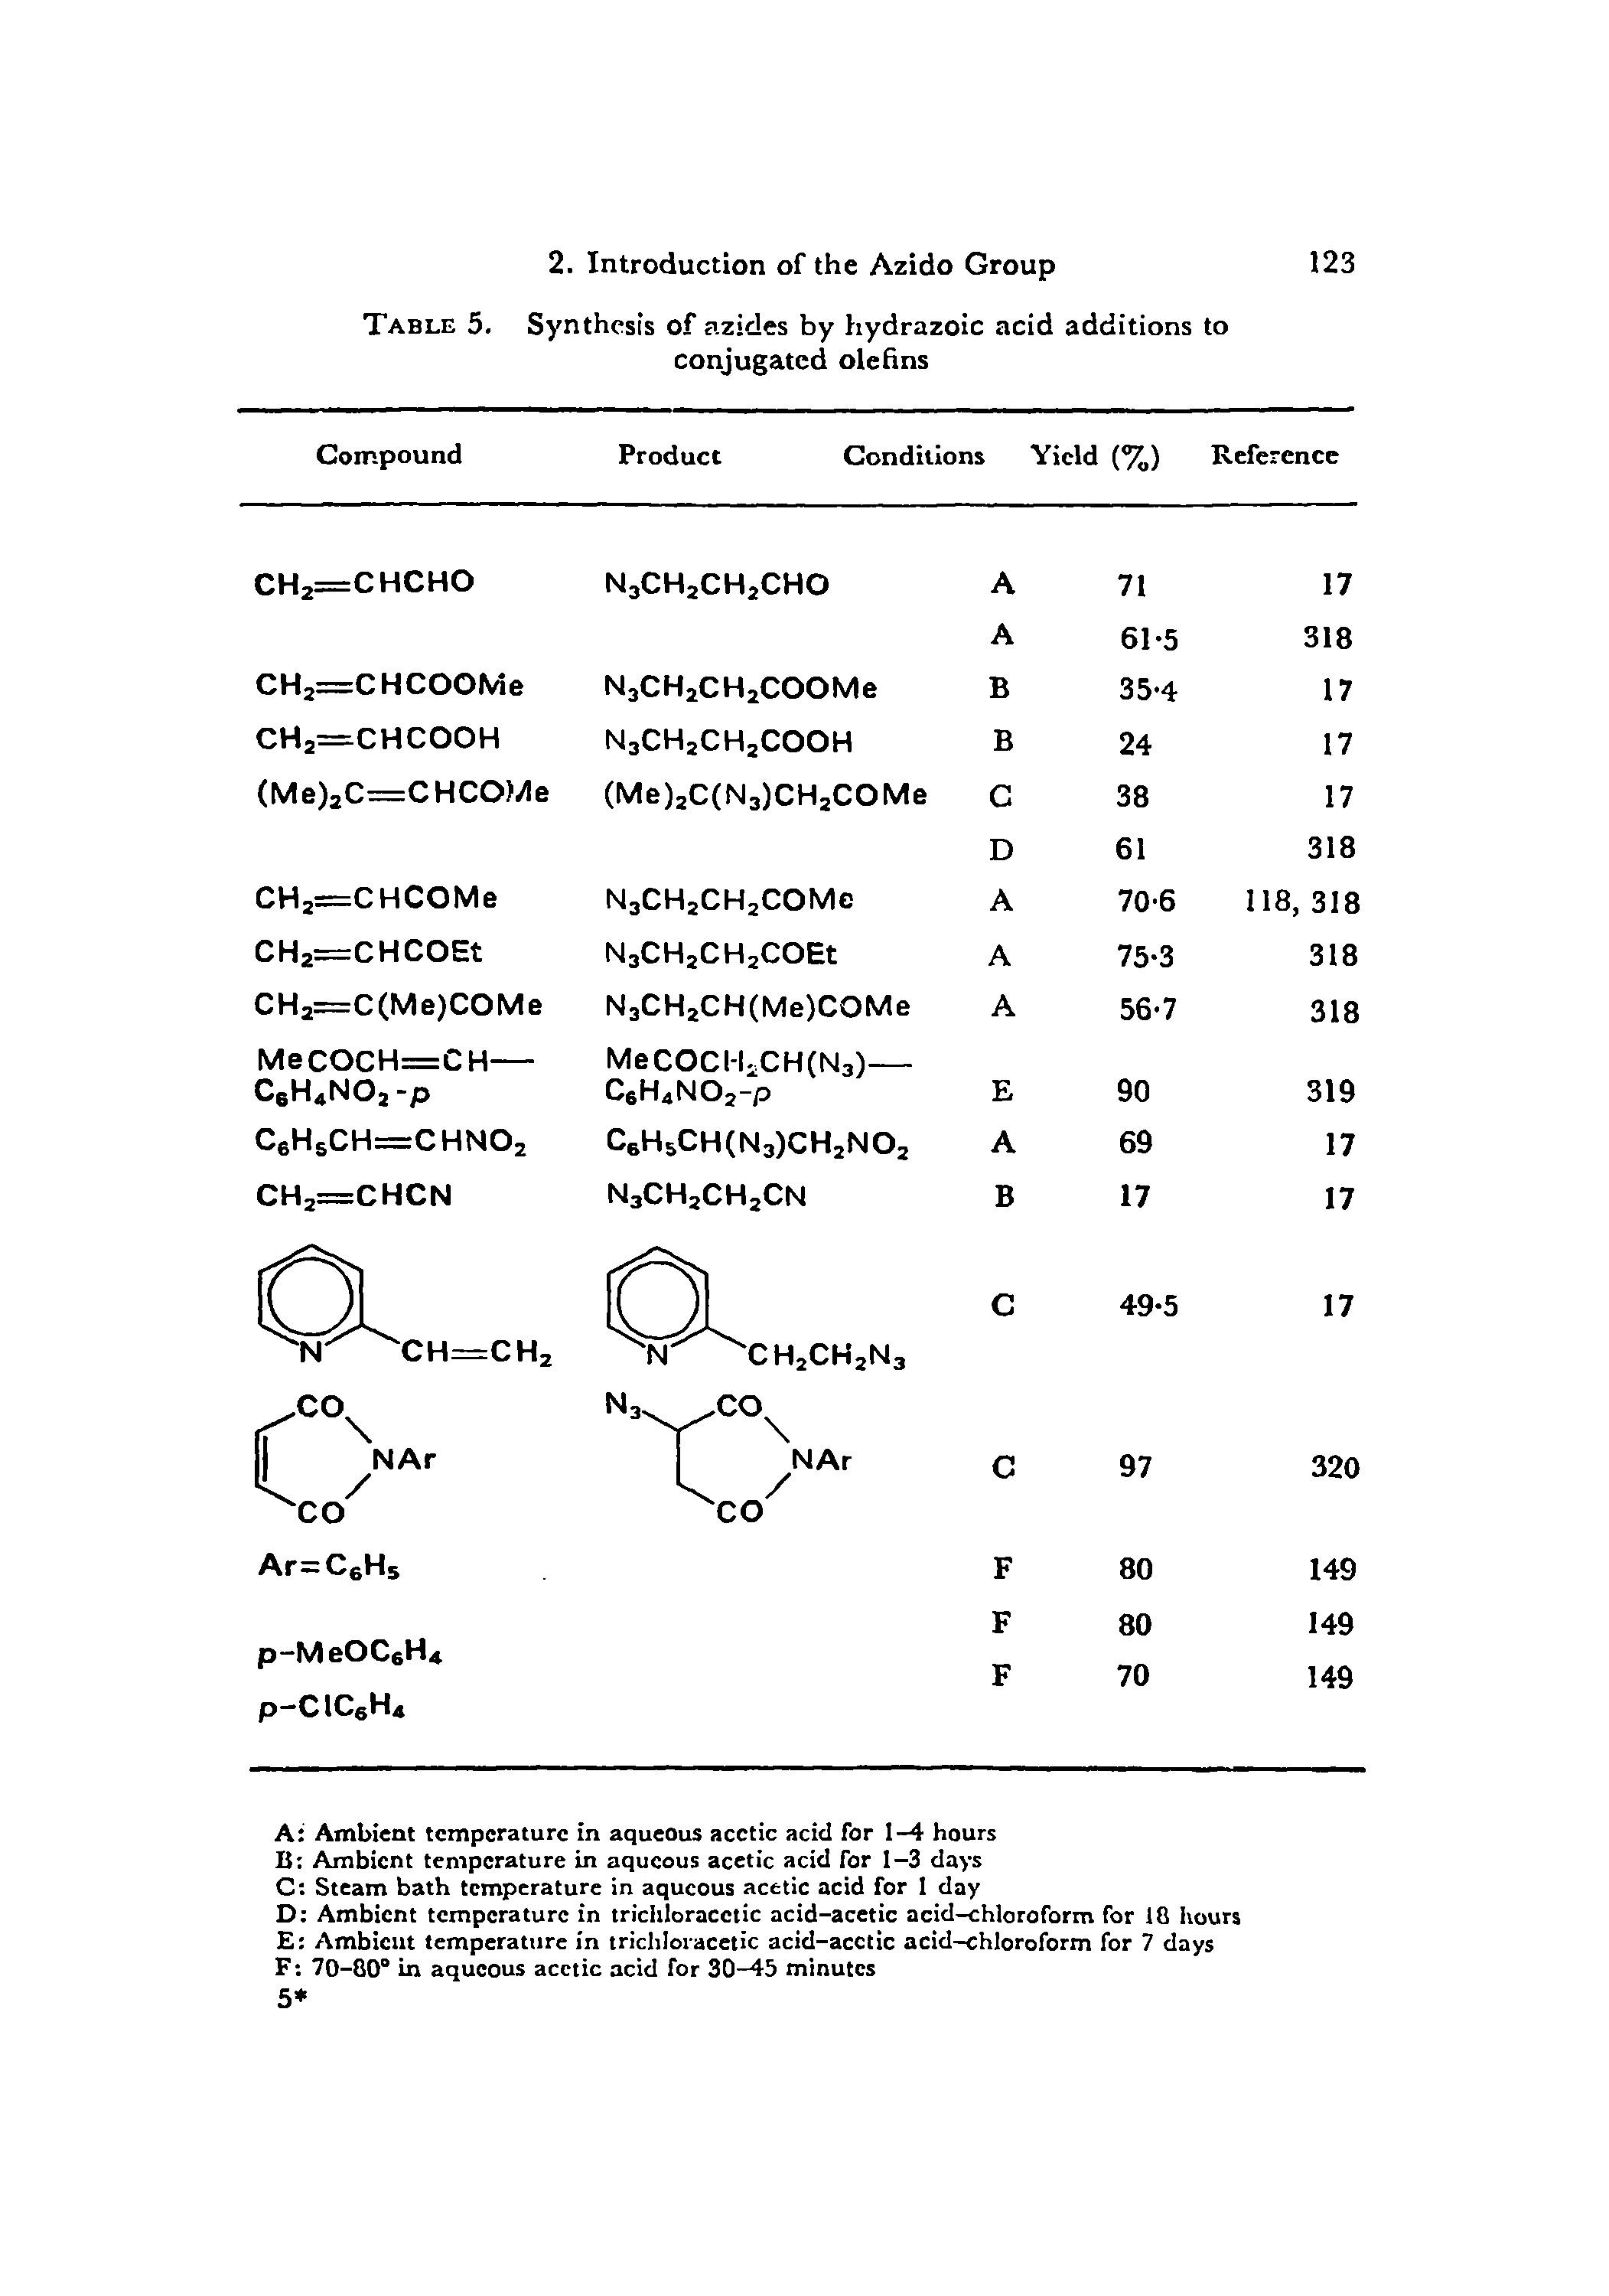 Table 5. Synthesis of azides by hydrazoic acid additions to conjugated olehns...